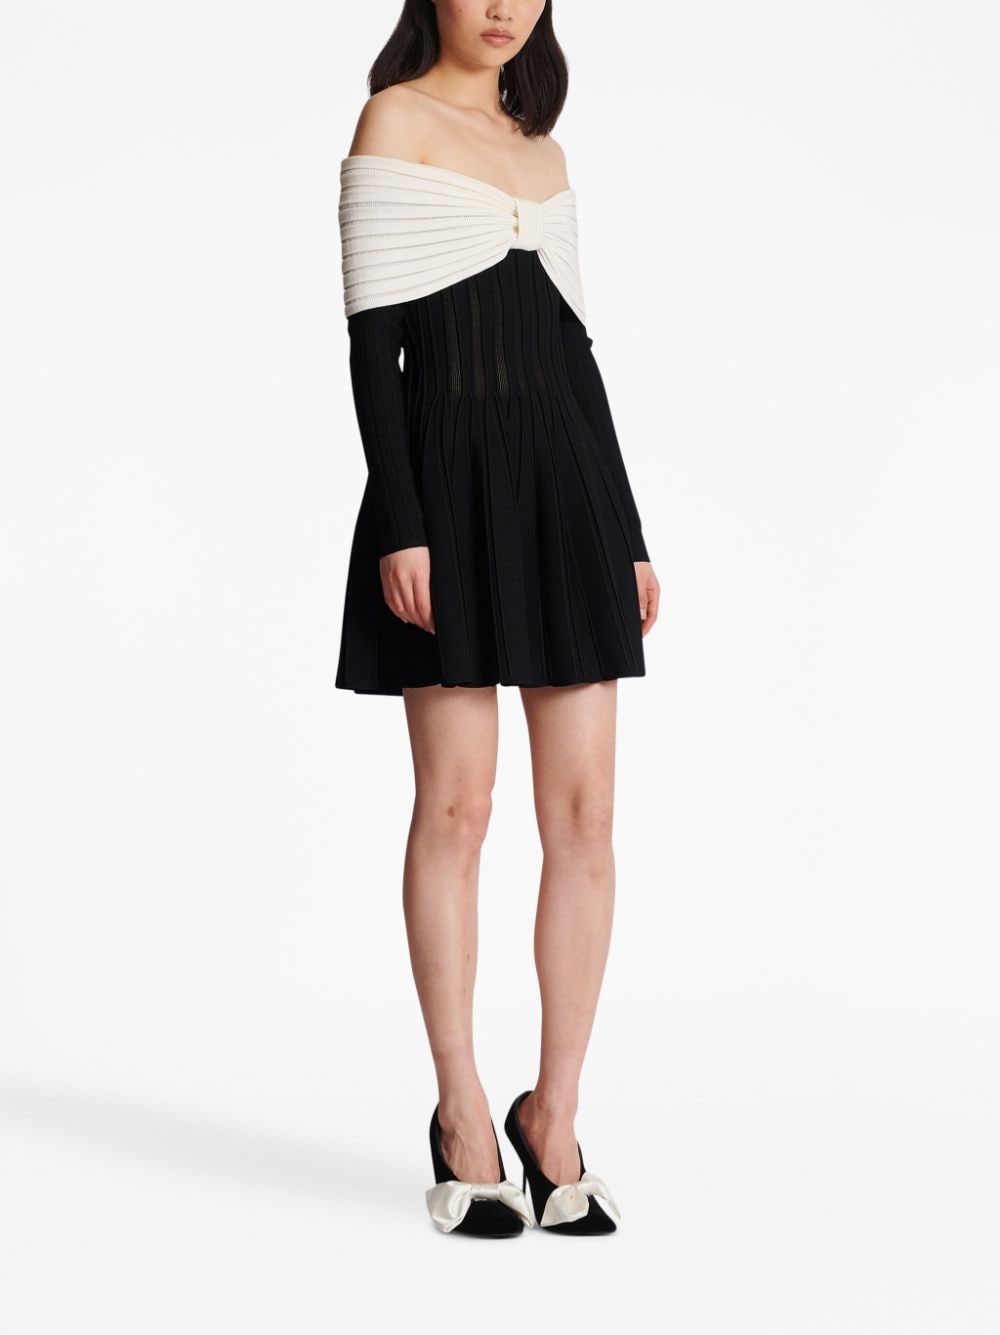 BALMAIN Black Off-Shoulder Knit Dress with Two-Tone Colorblock and Pleated Skirt